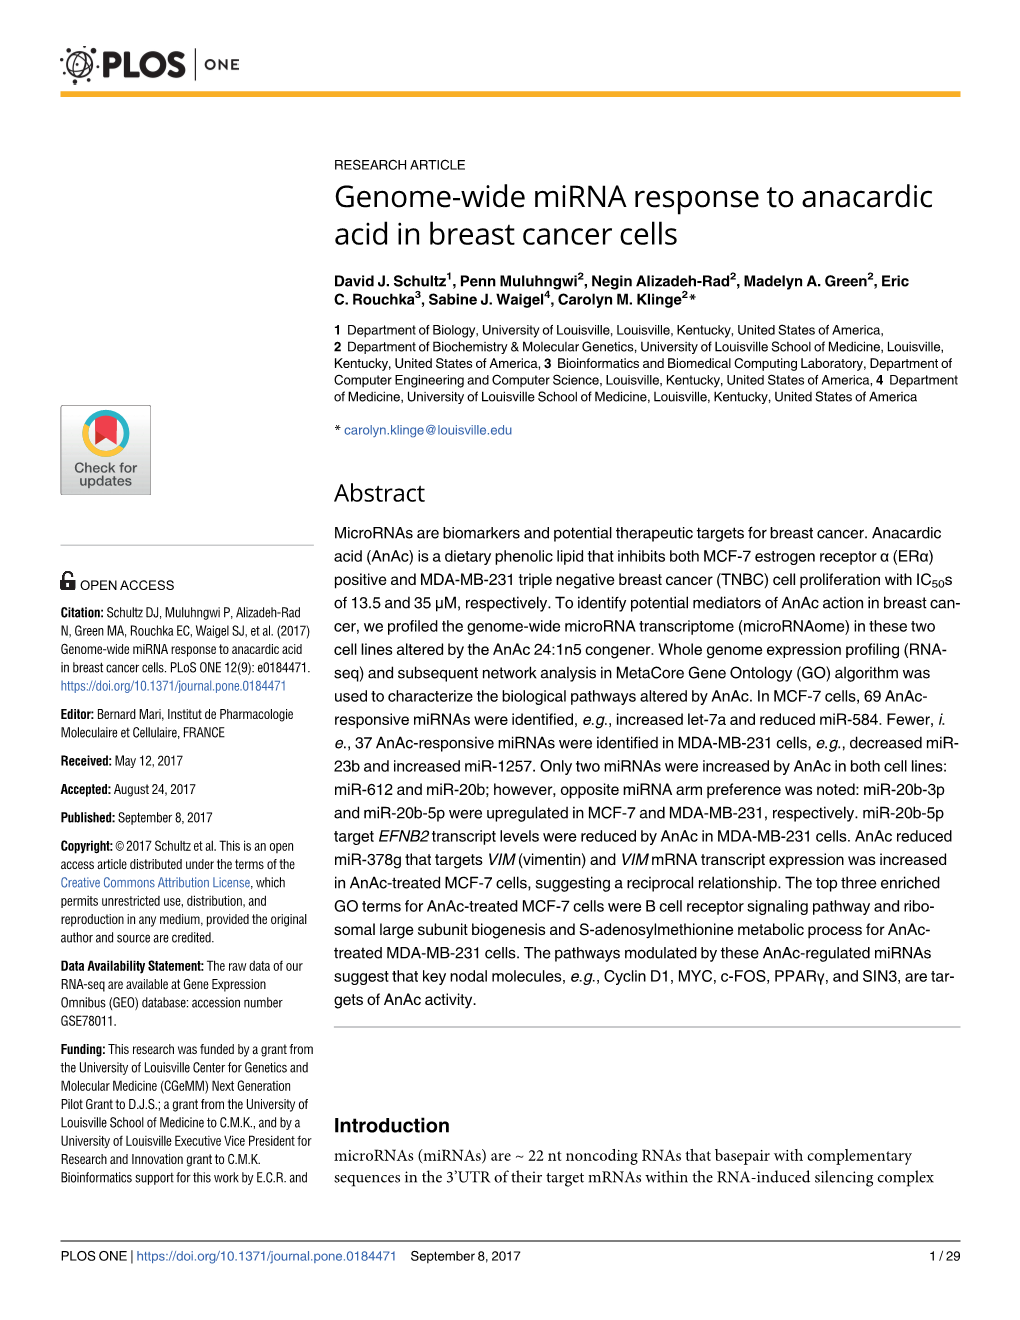 Genome-Wide Mirna Response to Anacardic Acid in Breast Cancer Cells